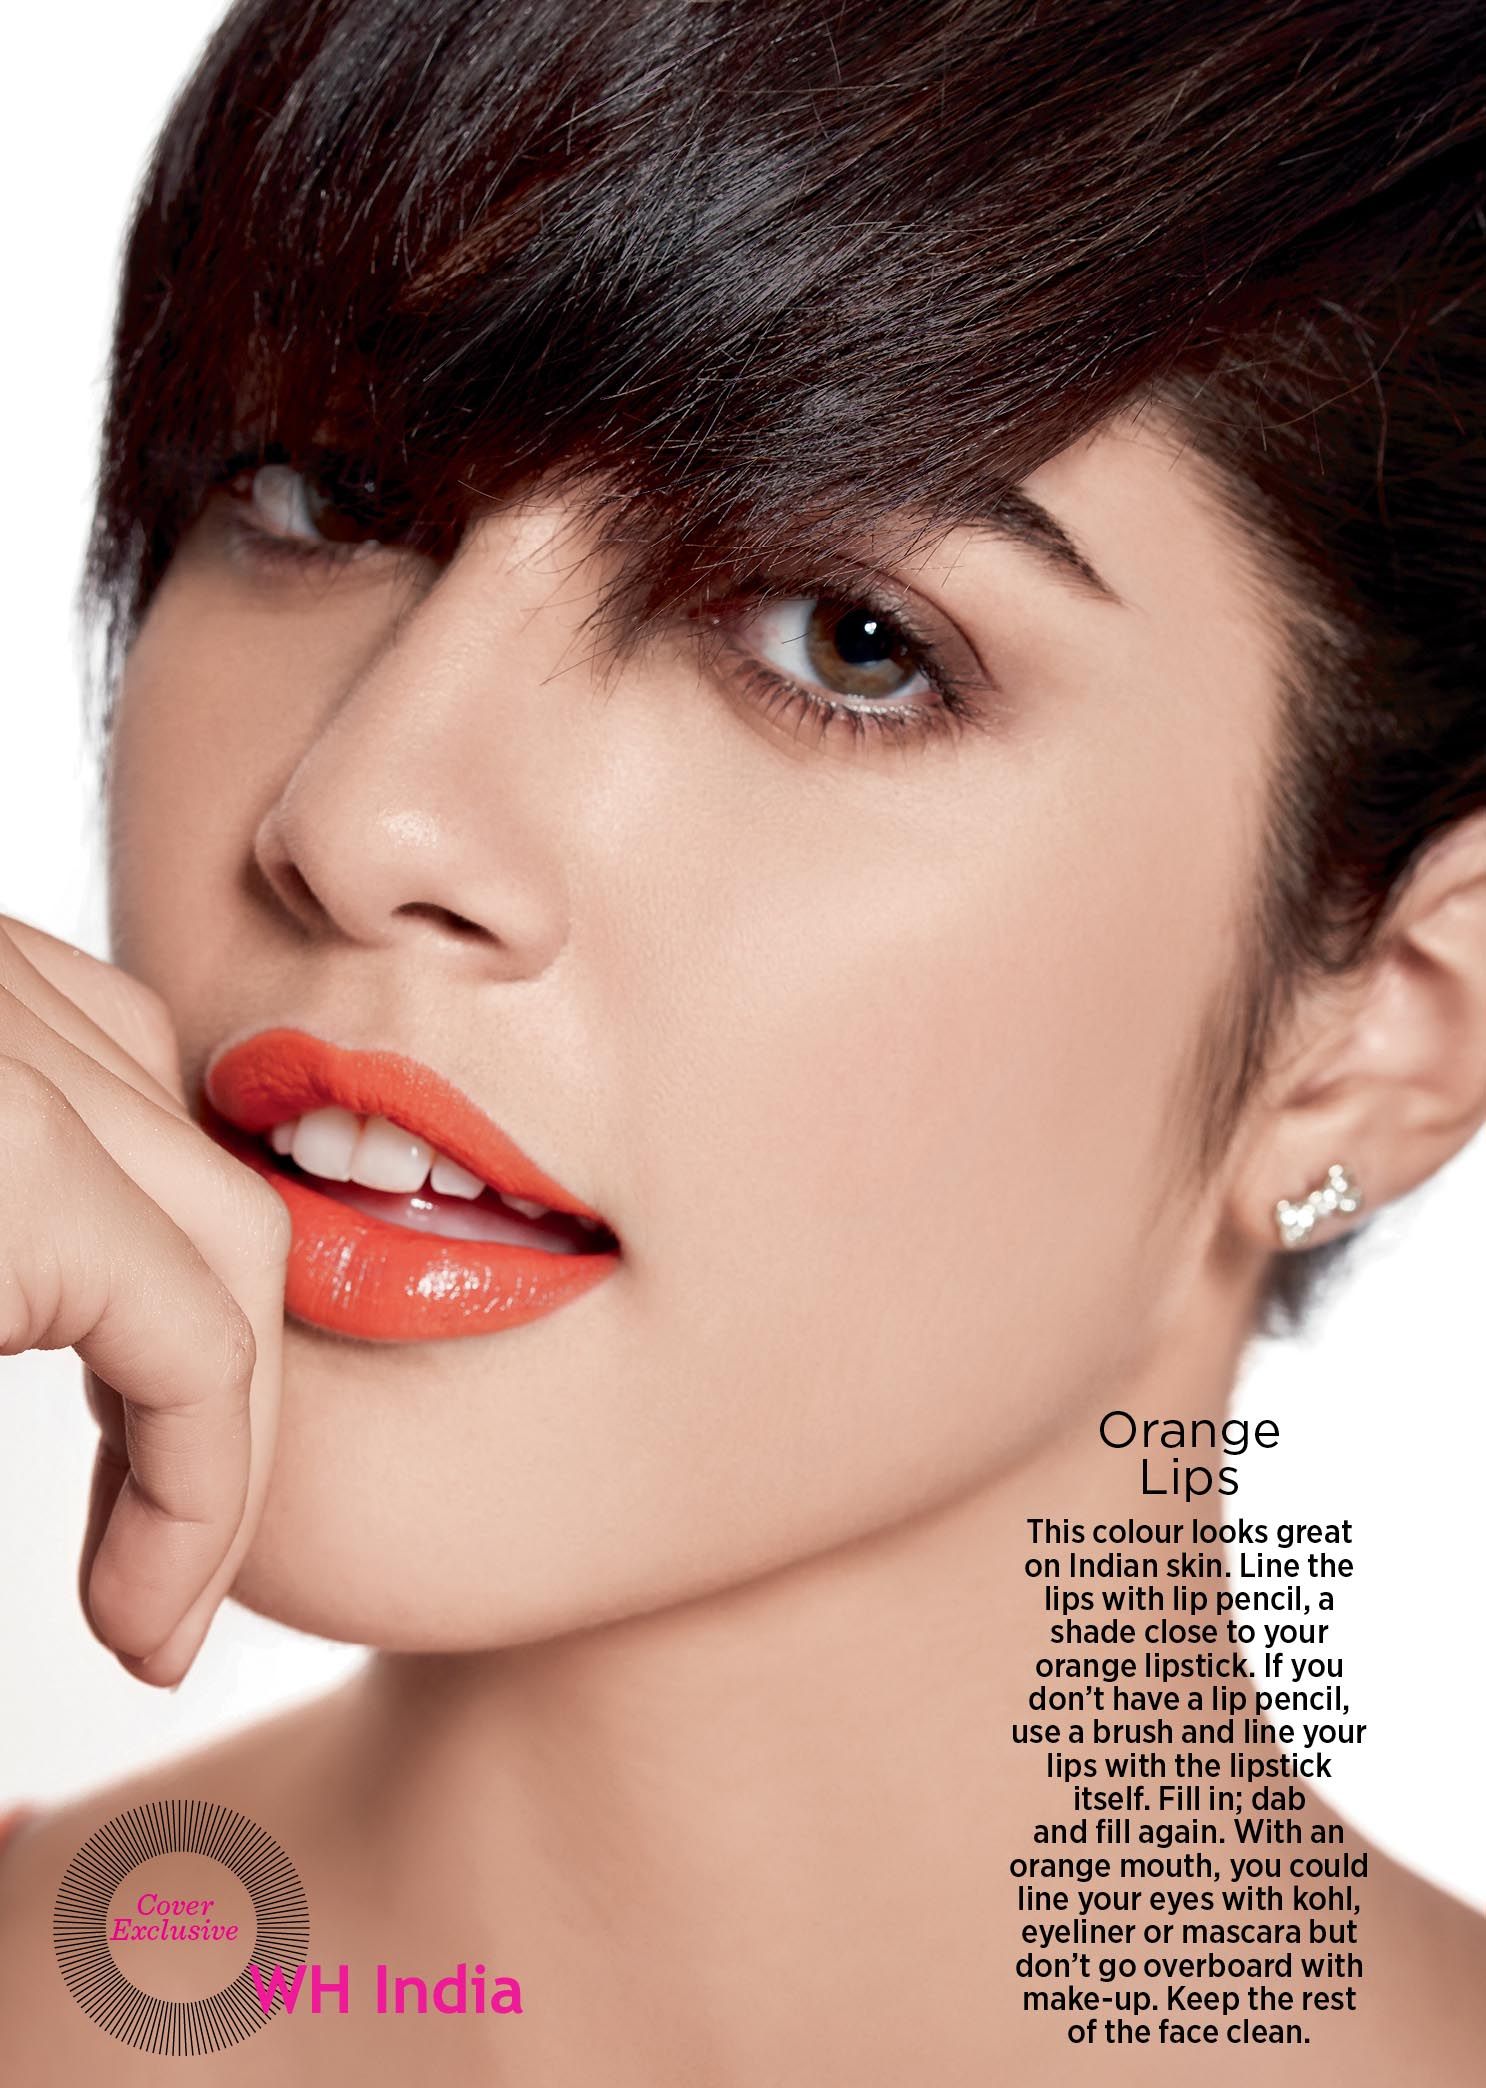 Wh Cover Girl Izabelle Leite Rocks Orange Lips With Image